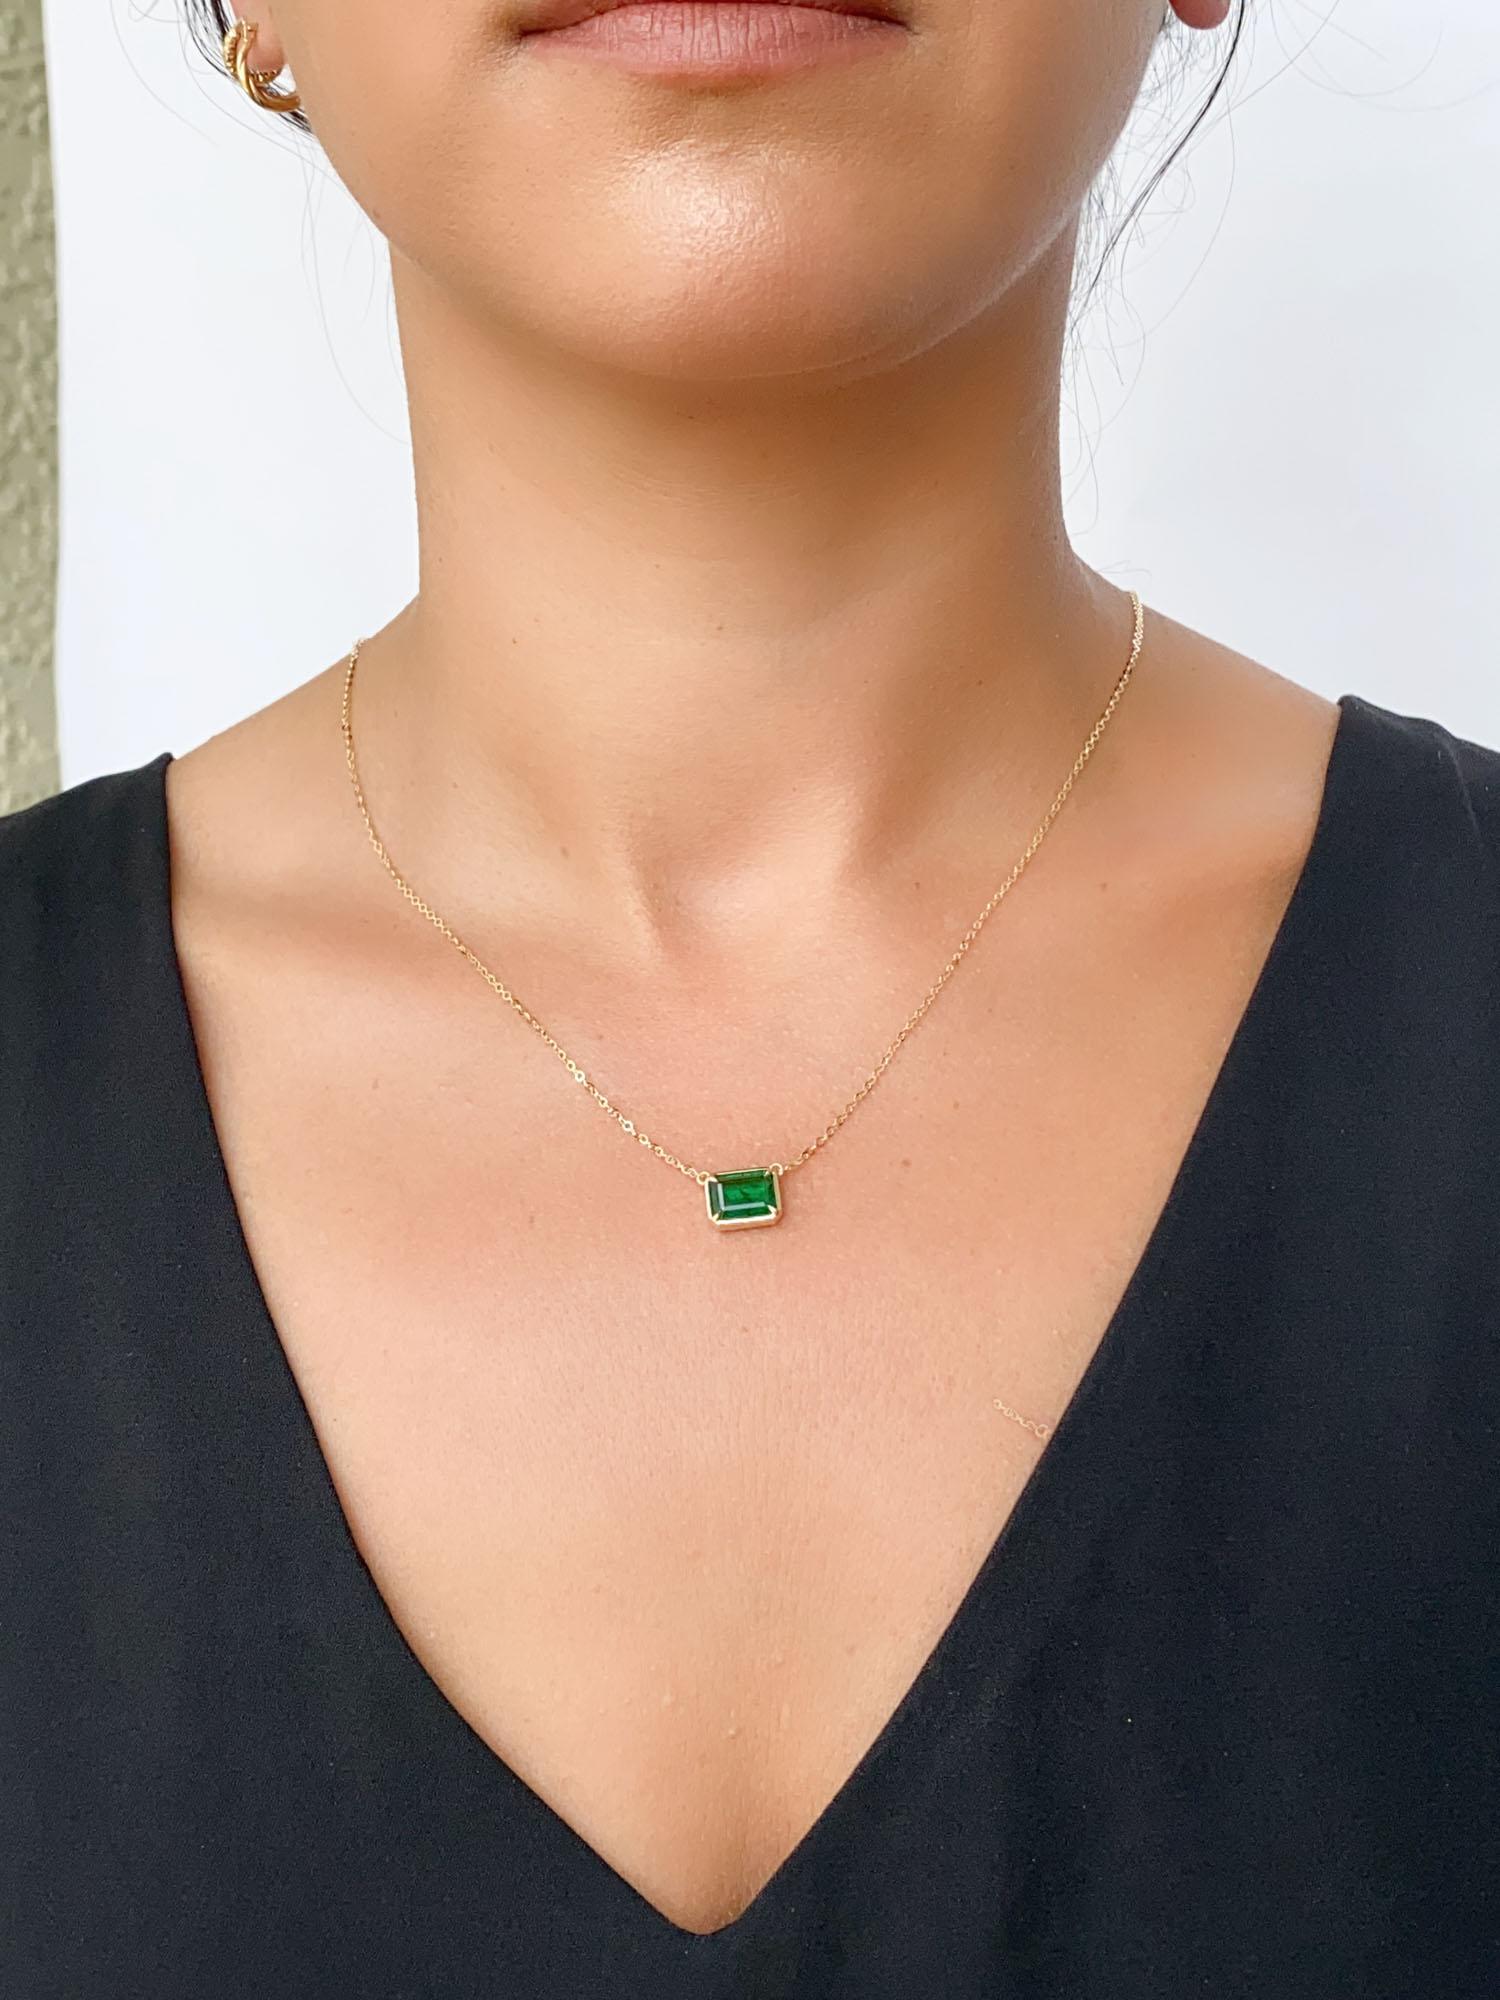 1.73ct Bright Green Zambian Emerald Necklace 14K Gold R4470 For Sale 3